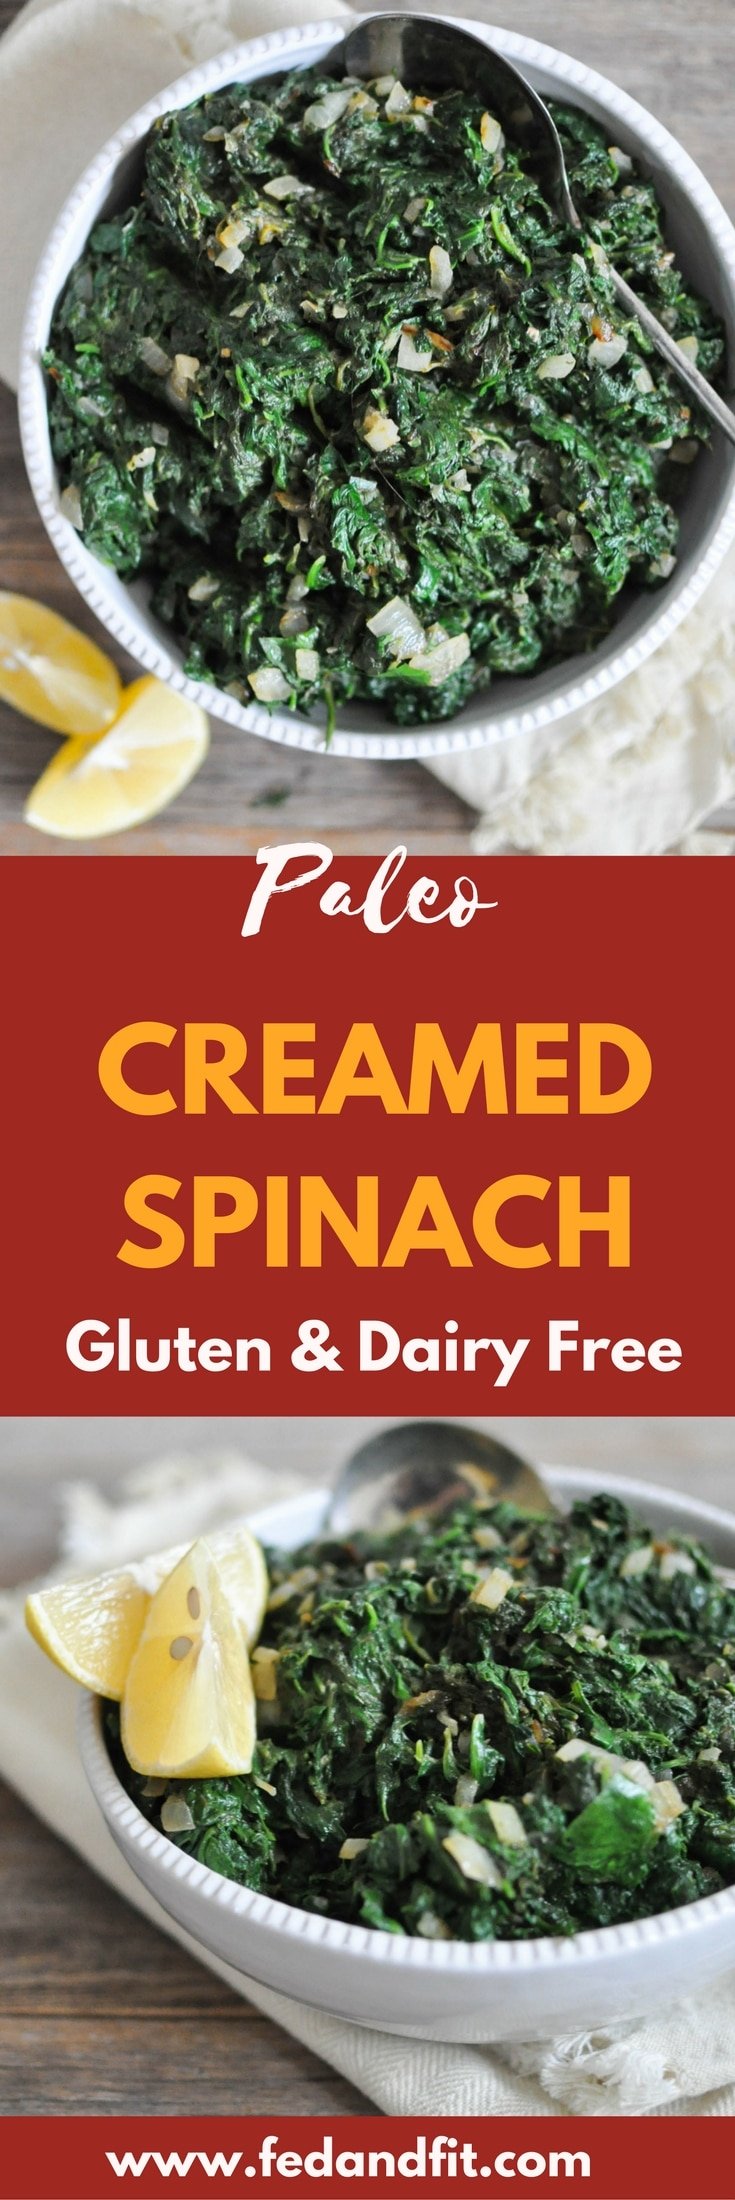 This creamed spinach recipe is easy, healthy, free of dairy and gluten, and totally Paleo-friendly!